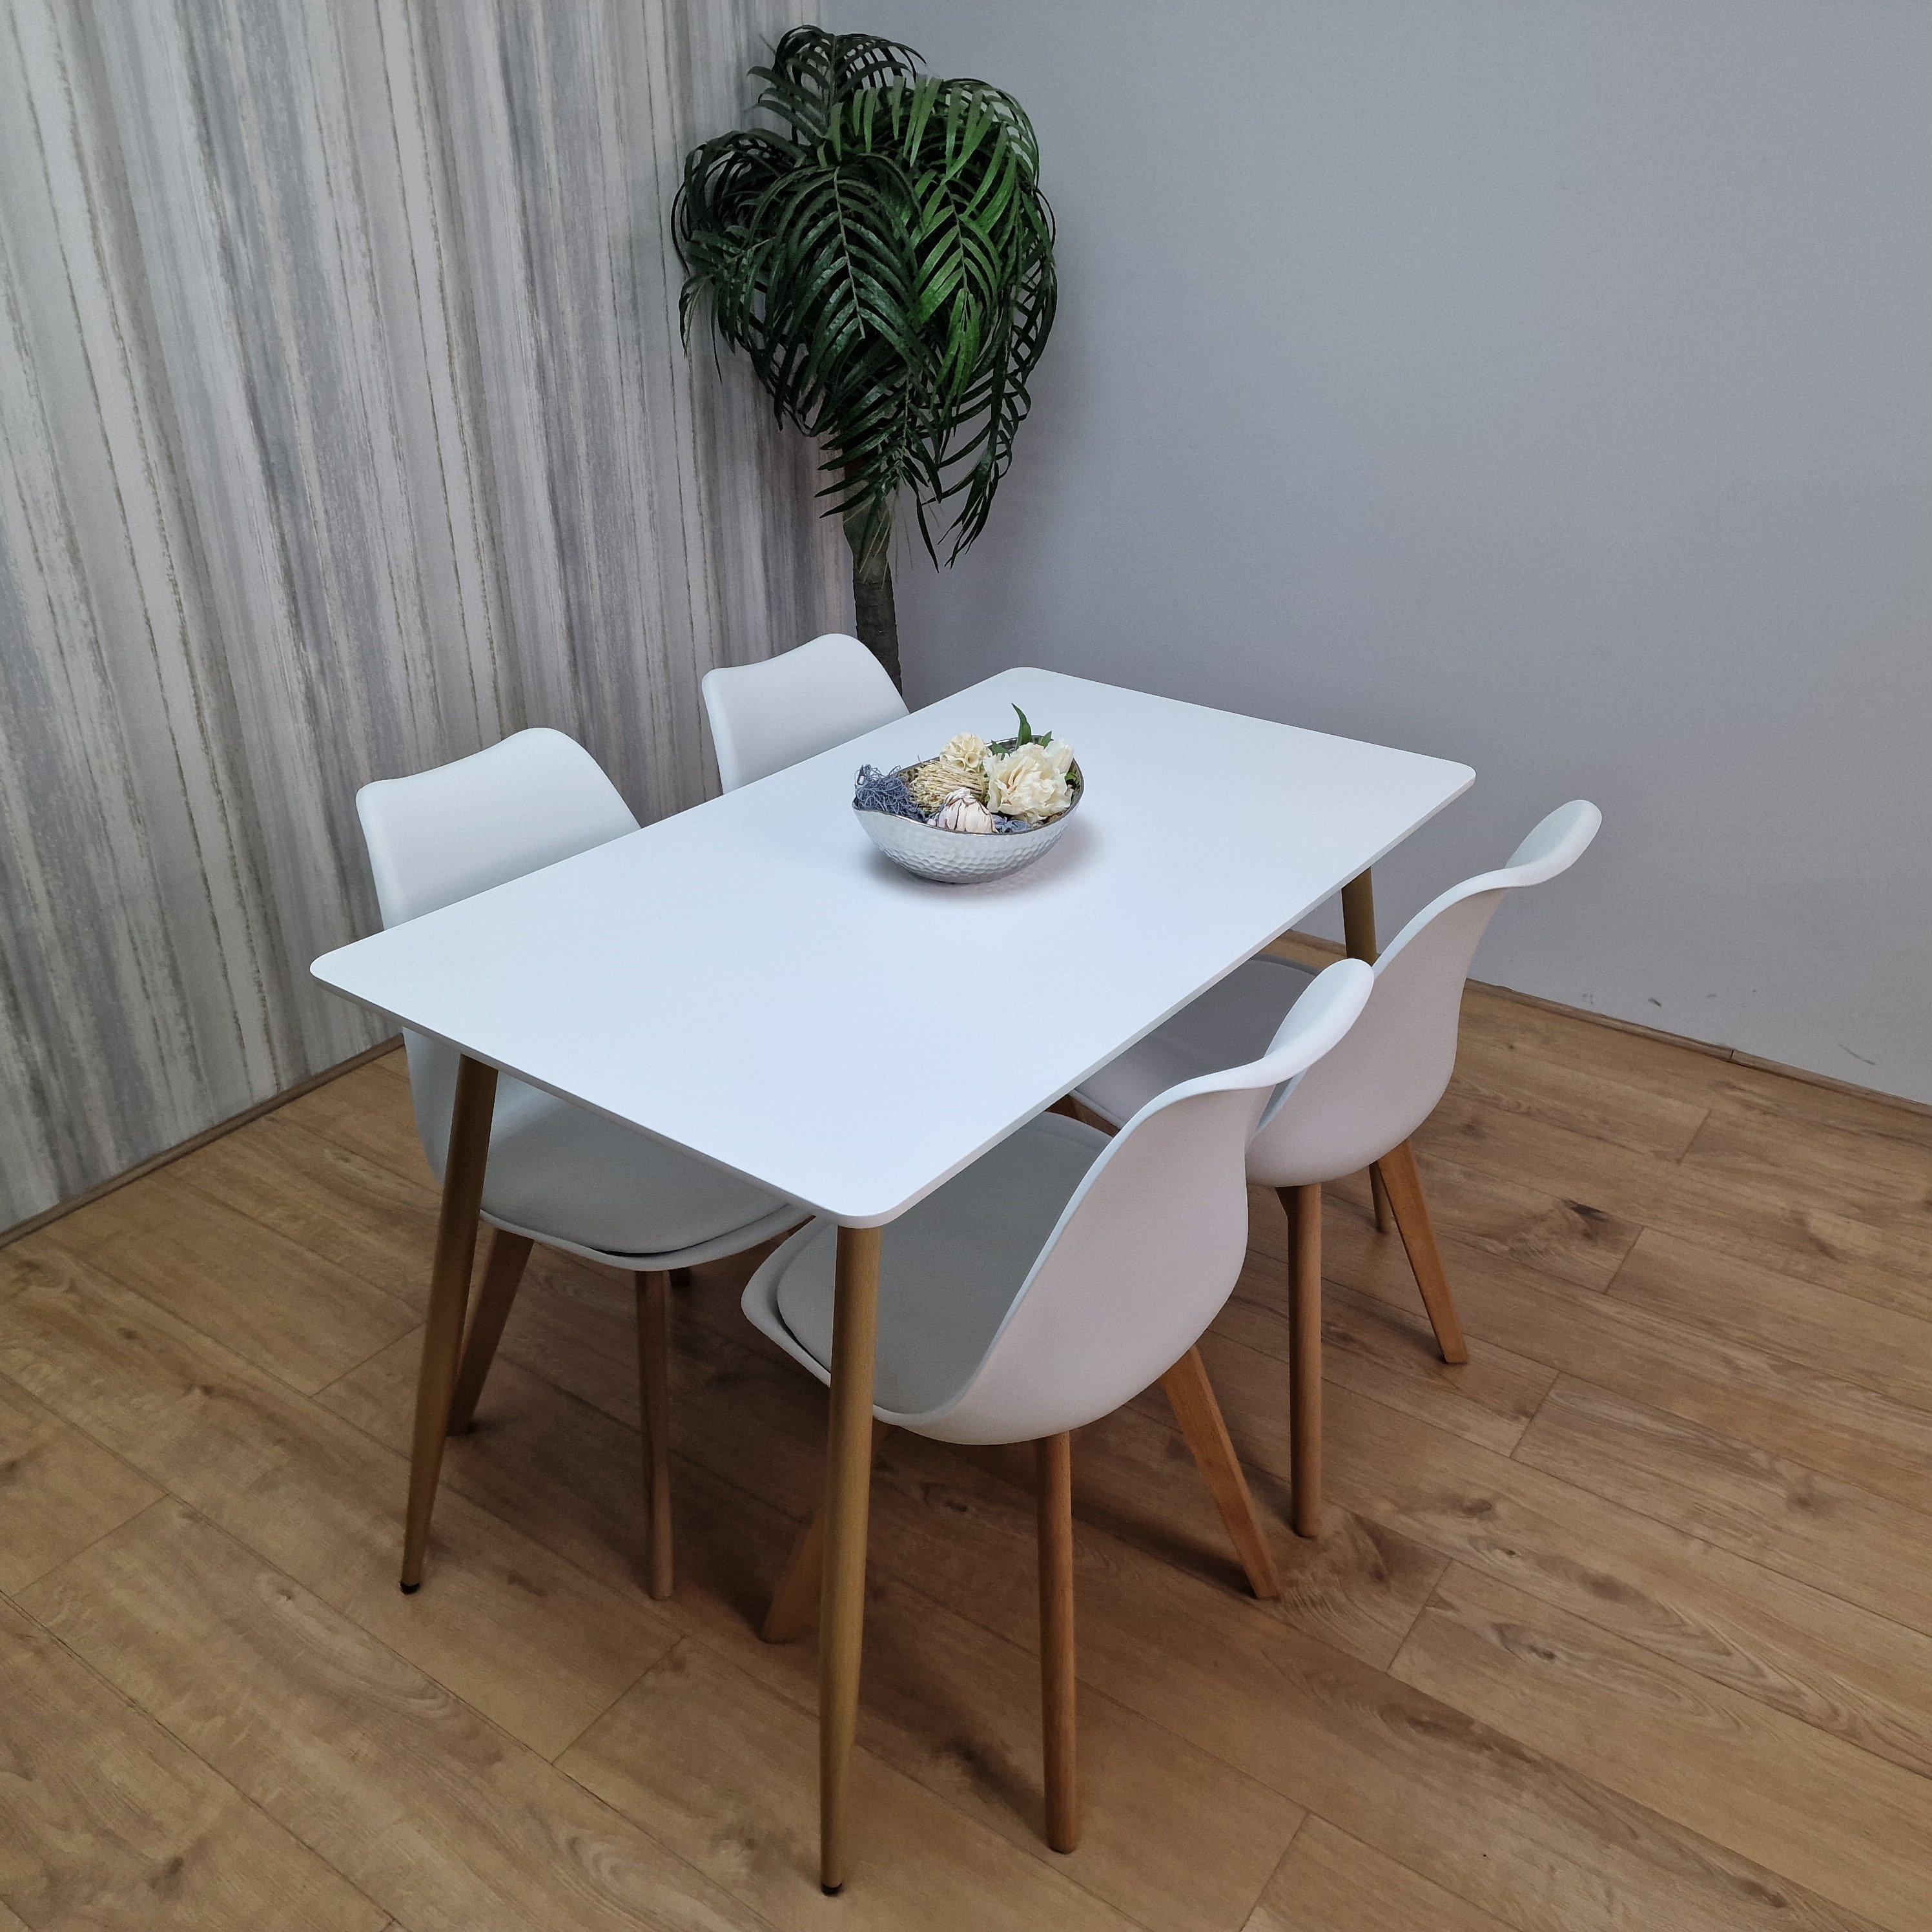 Kitchen Dining Table With 4 Tulip Chairs Table Set Of 4